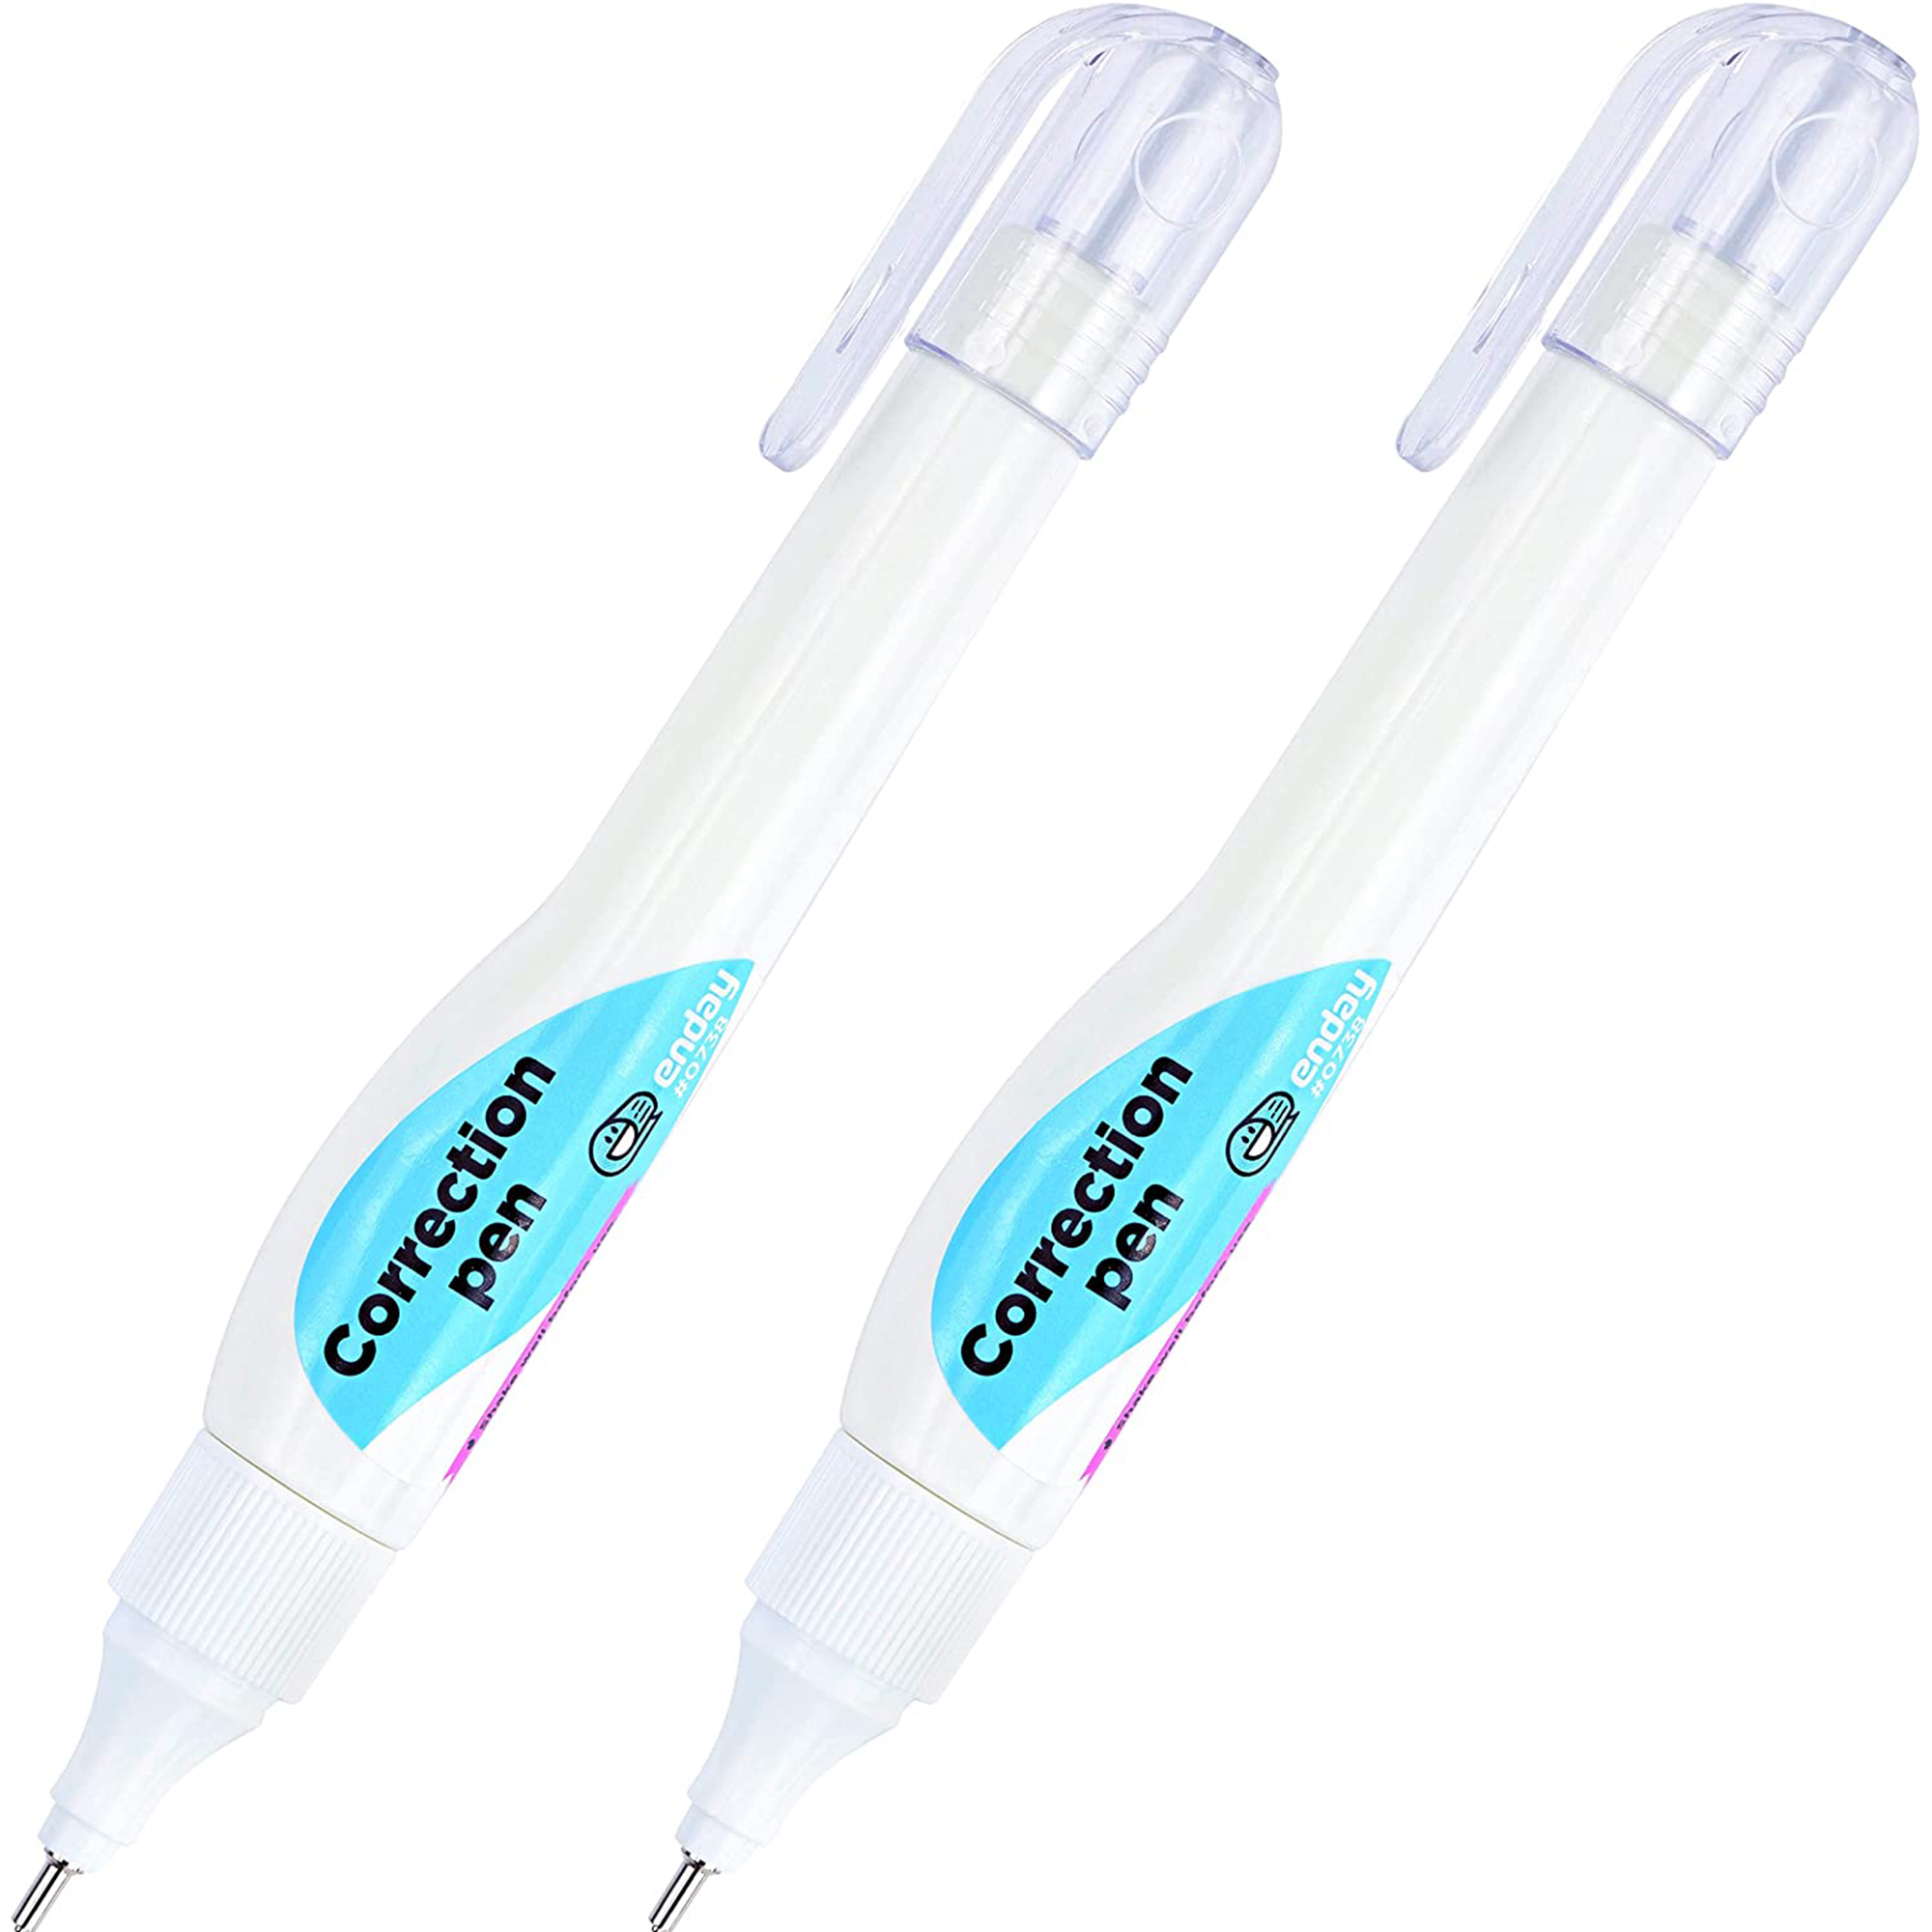 Enday Liquid Paper White Out Pen 7 ml Correction Fluid Ink Eraser, 2 Pack